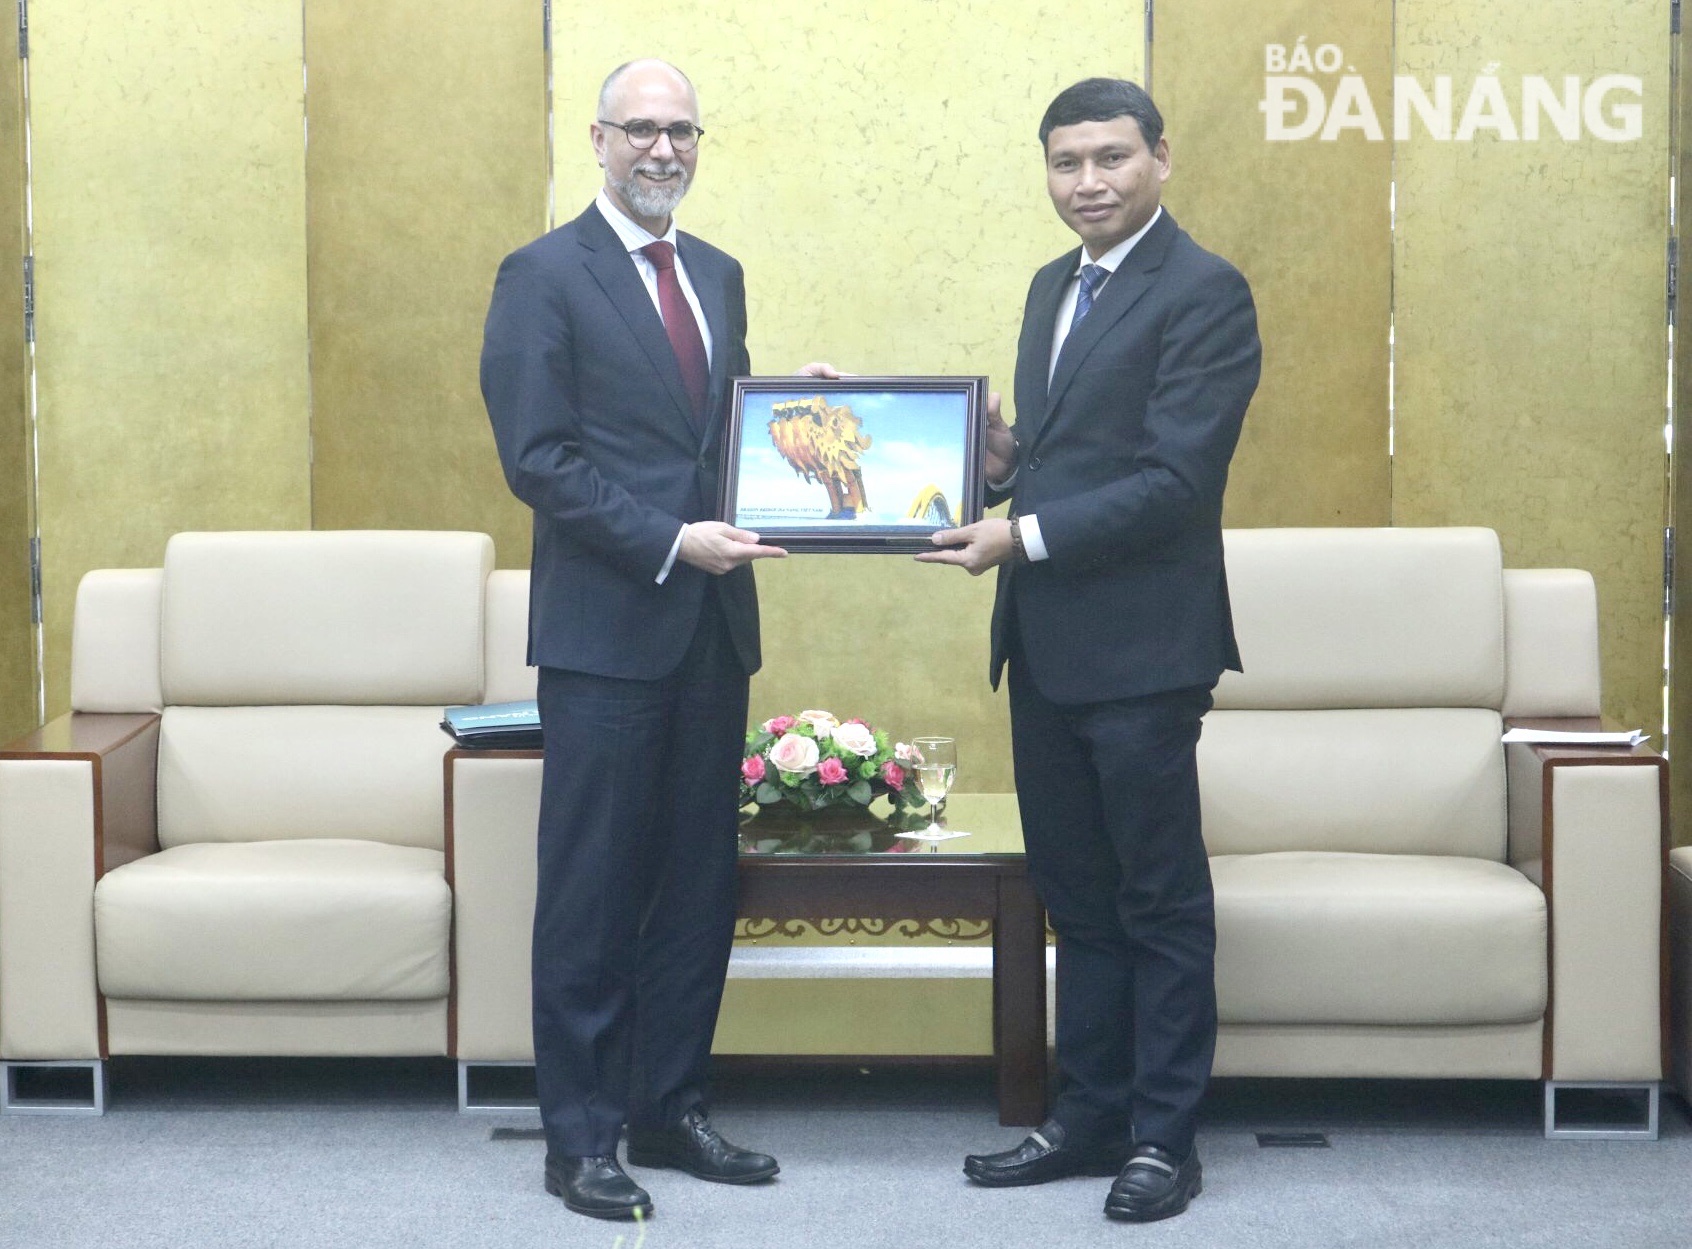 Da Nang People's Committee Vice Chairman Ho Ky Minh (right) presents momento to Canadian Ambassador to Viet Nam Shawn Perry Steil. Photo: N. QUANG